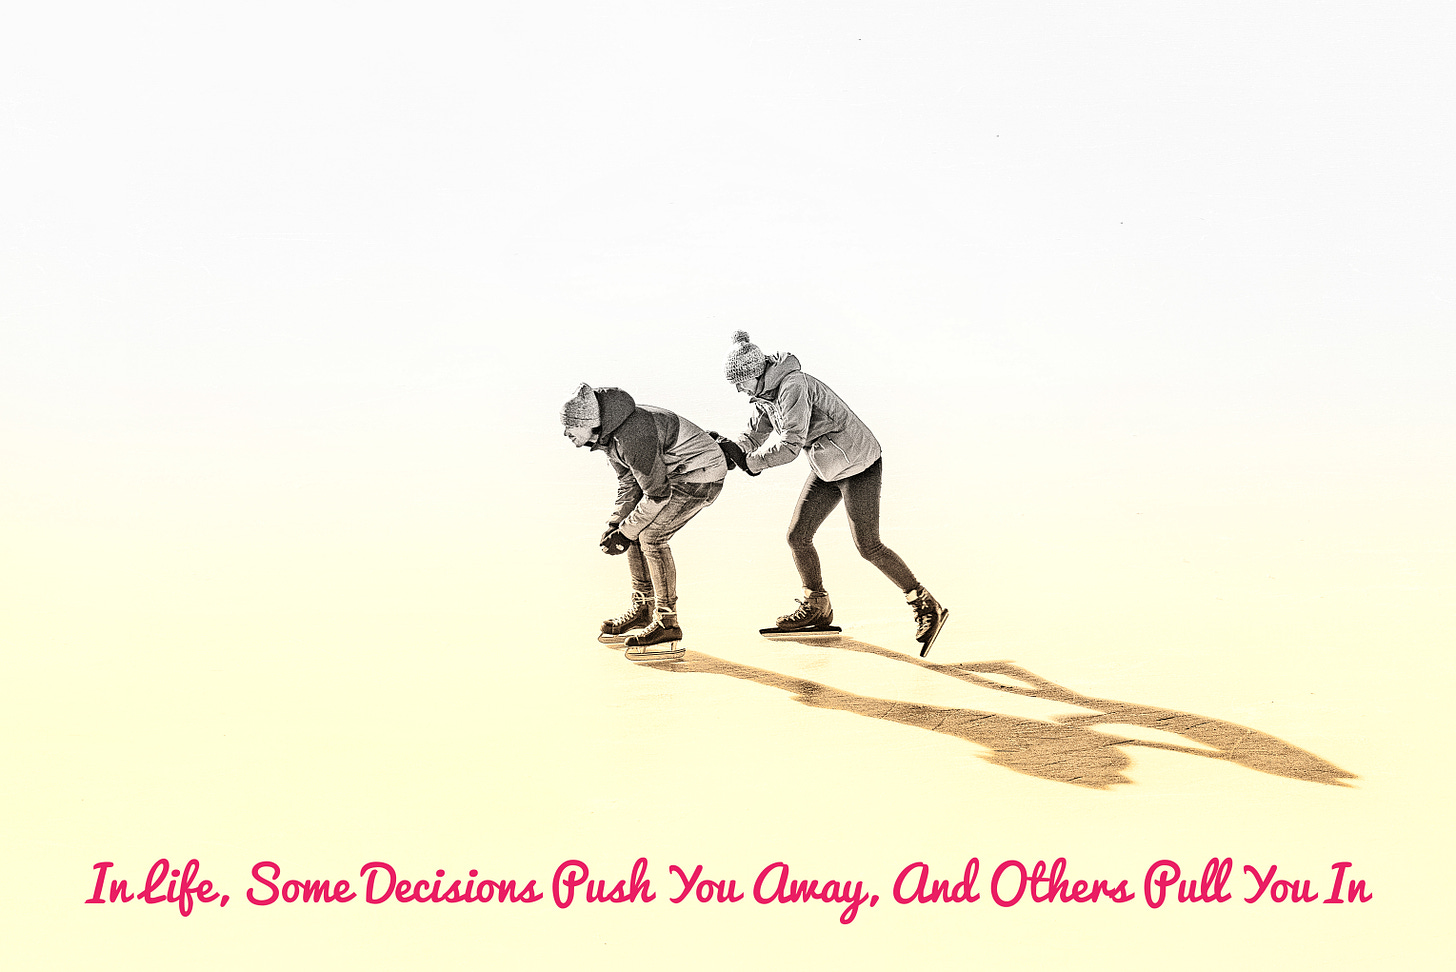 Two people ice skating, one pushing the other along, captioned "In life, some decisions push you away, and others pull you in" in a loopy font